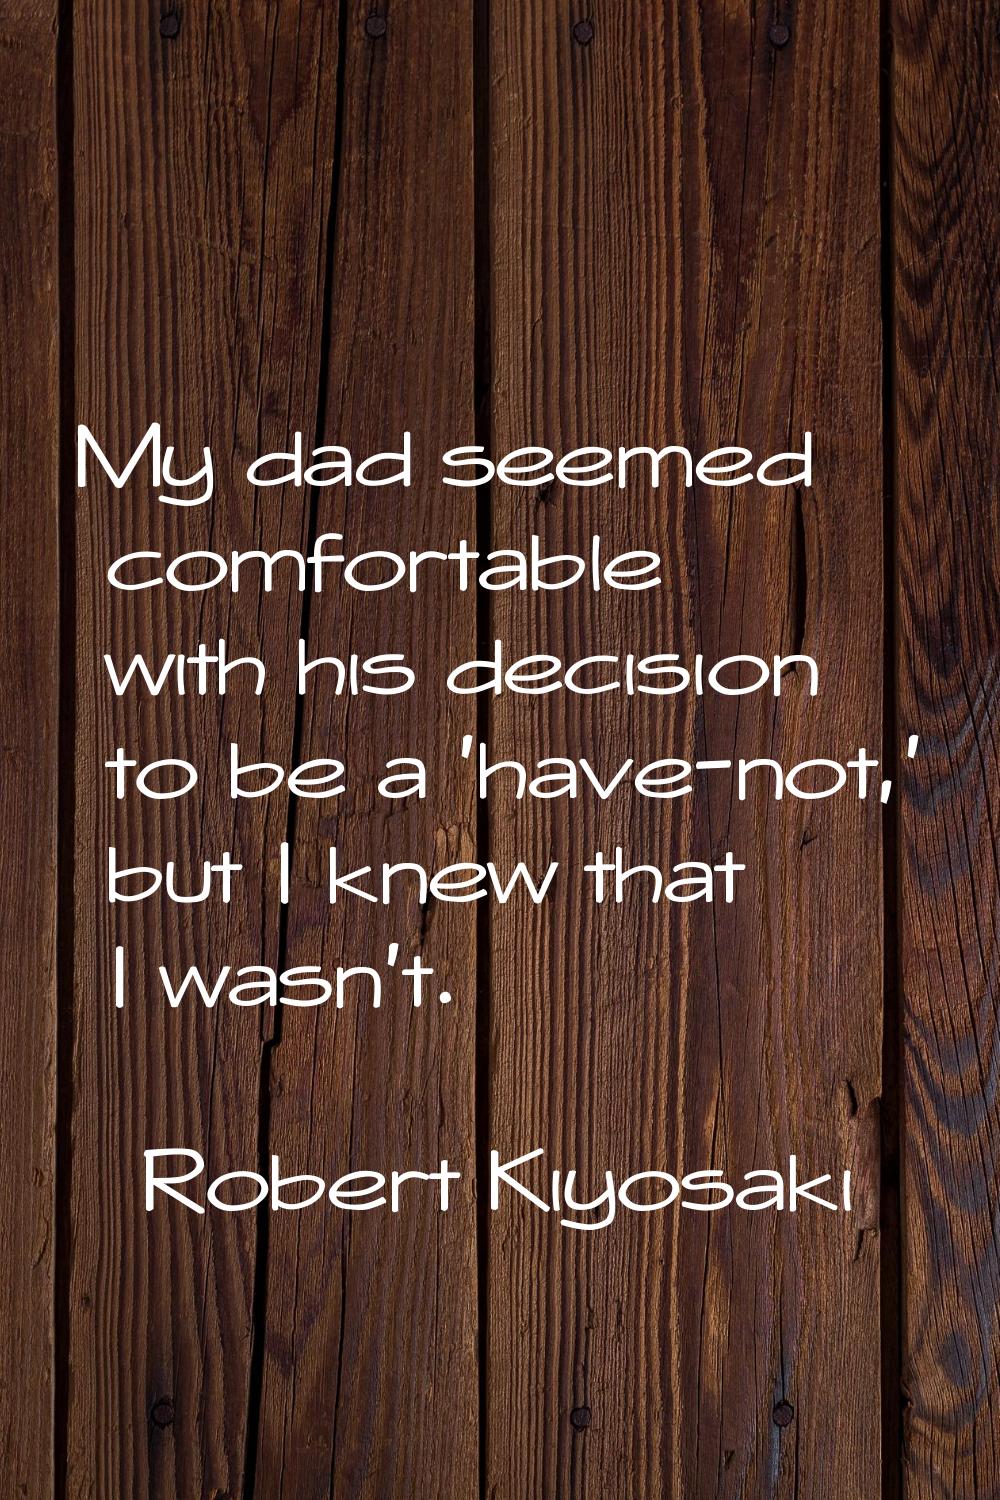 My dad seemed comfortable with his decision to be a 'have-not,' but I knew that I wasn't.